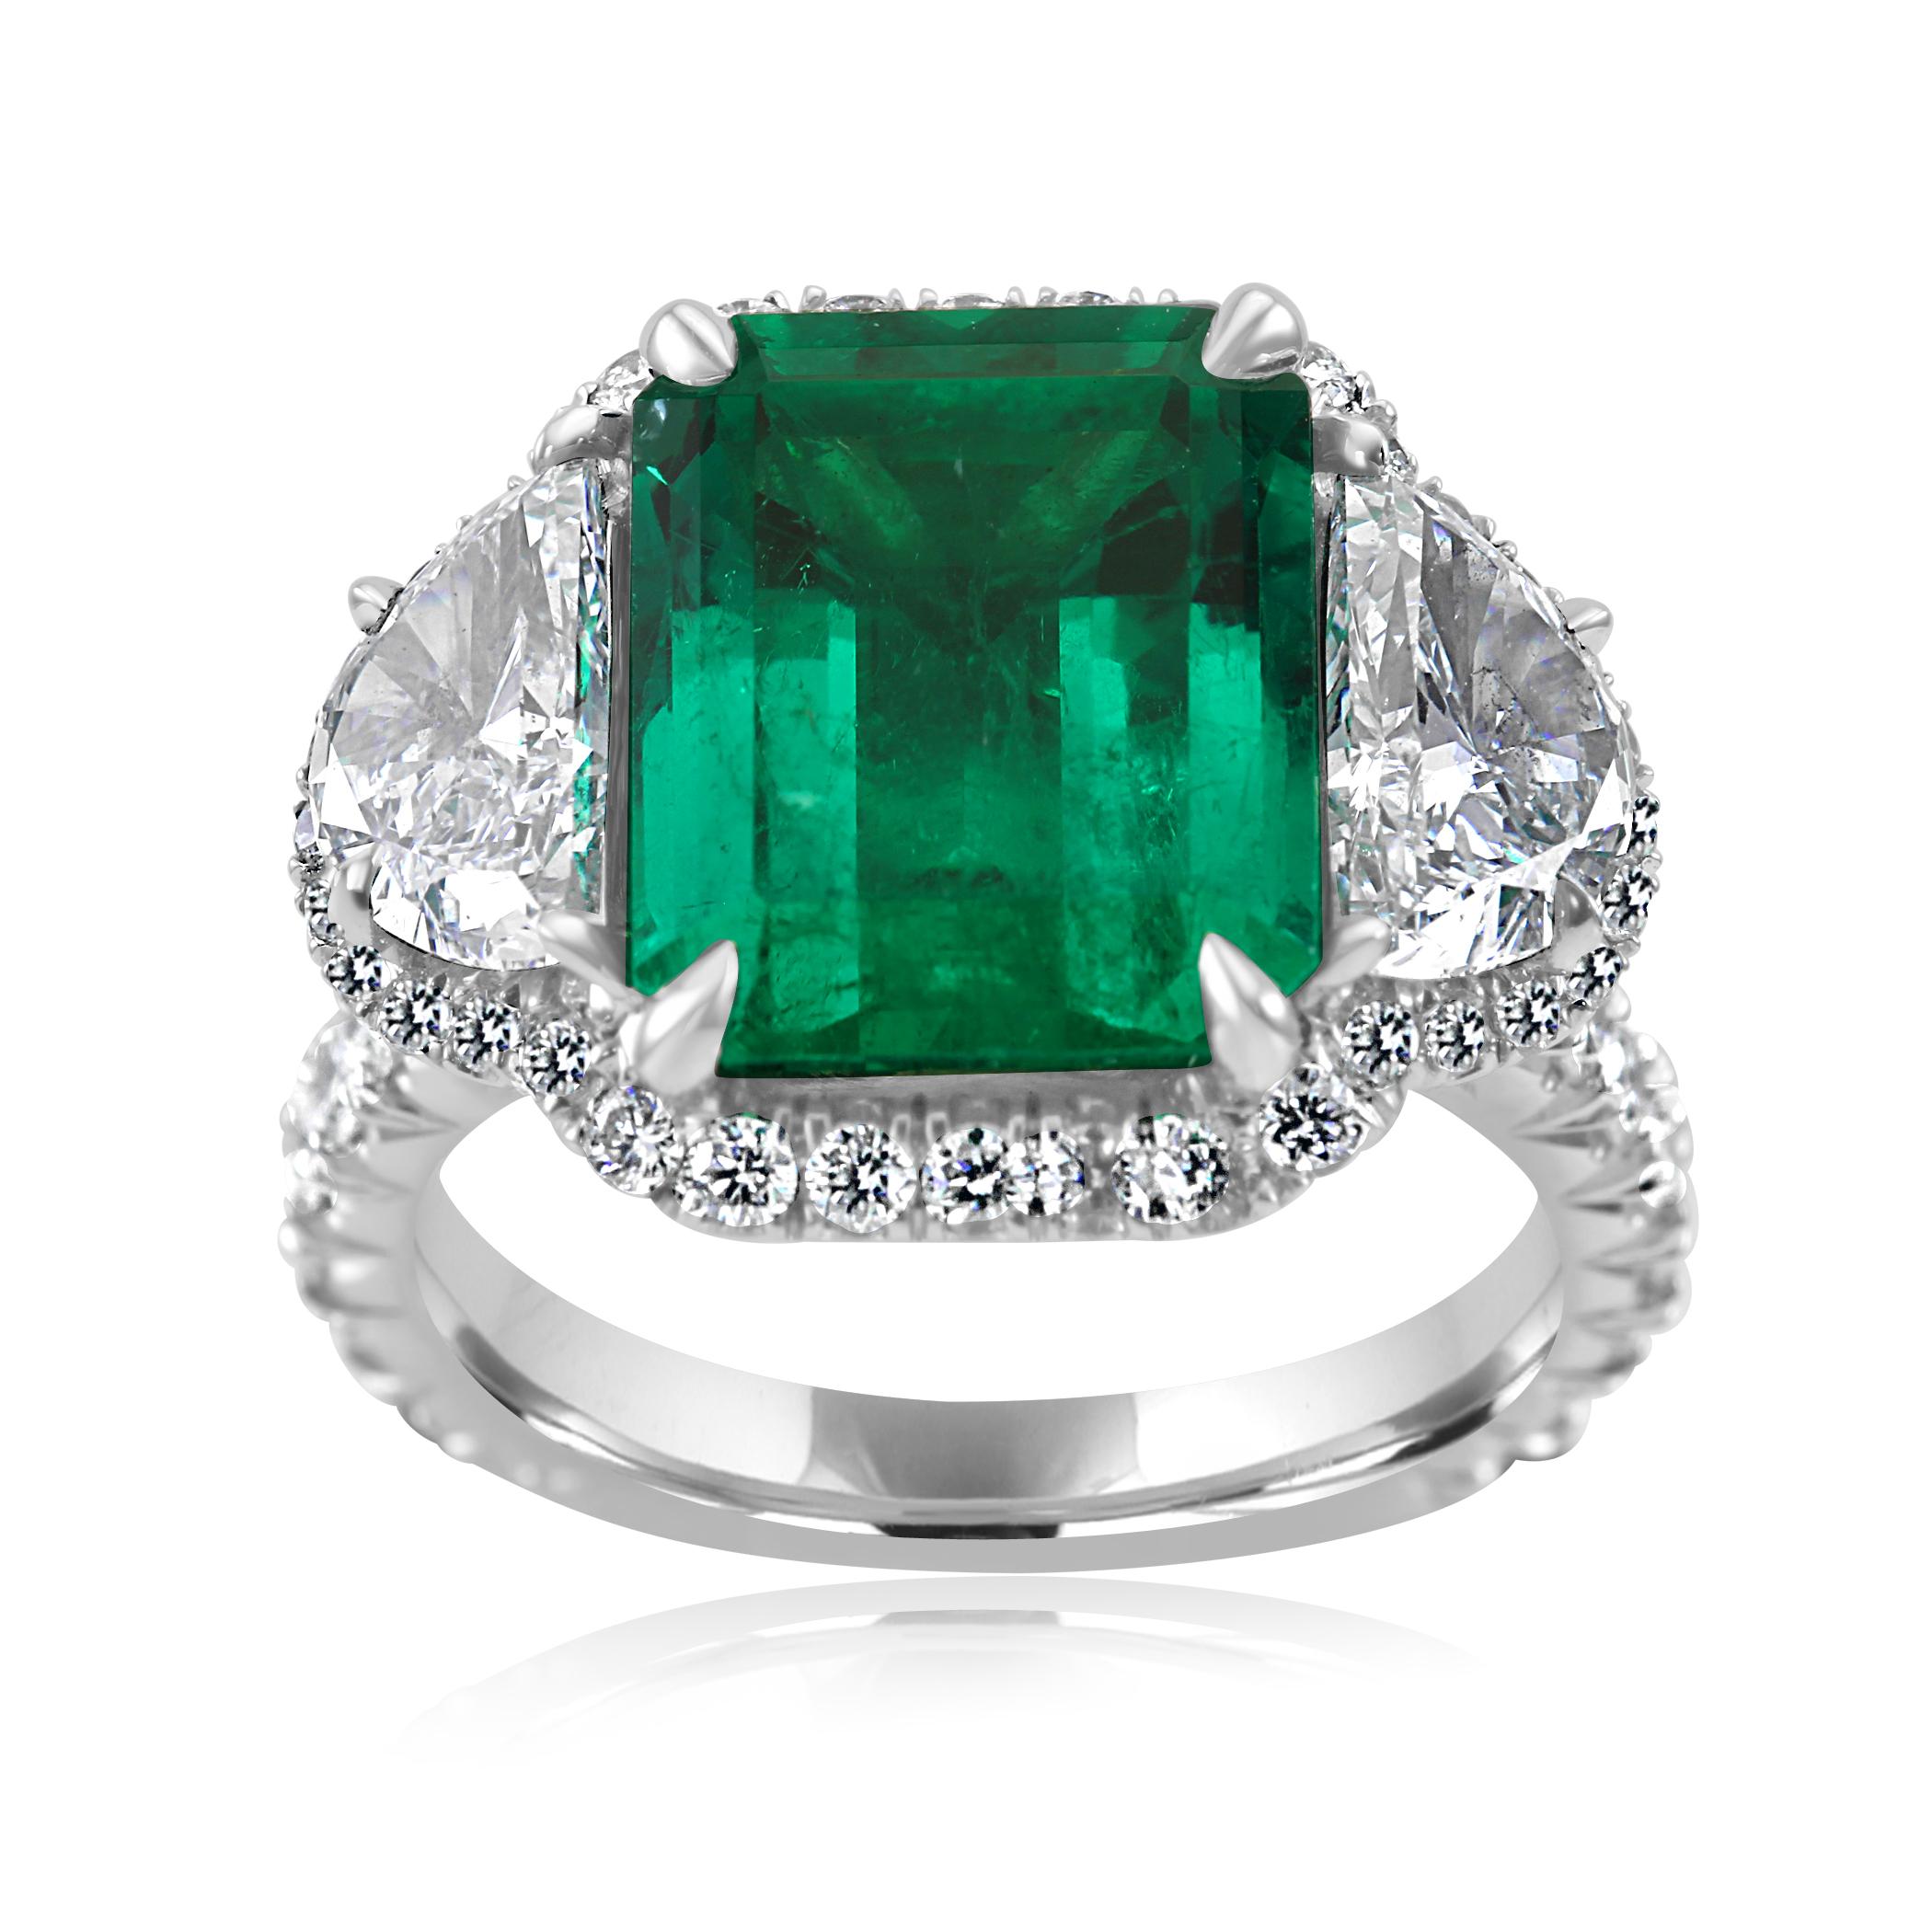 For The Collector, Extremely Rare and Exceptionally Gorgeous Quality 5.13 Carat No indications of clarity enhancement  Emerald Cut Emerald accompanied by a GIA Report. Flanked with 2 White G-H Color VS Clarity Diamond Half Moon 1.59 Carat encircled